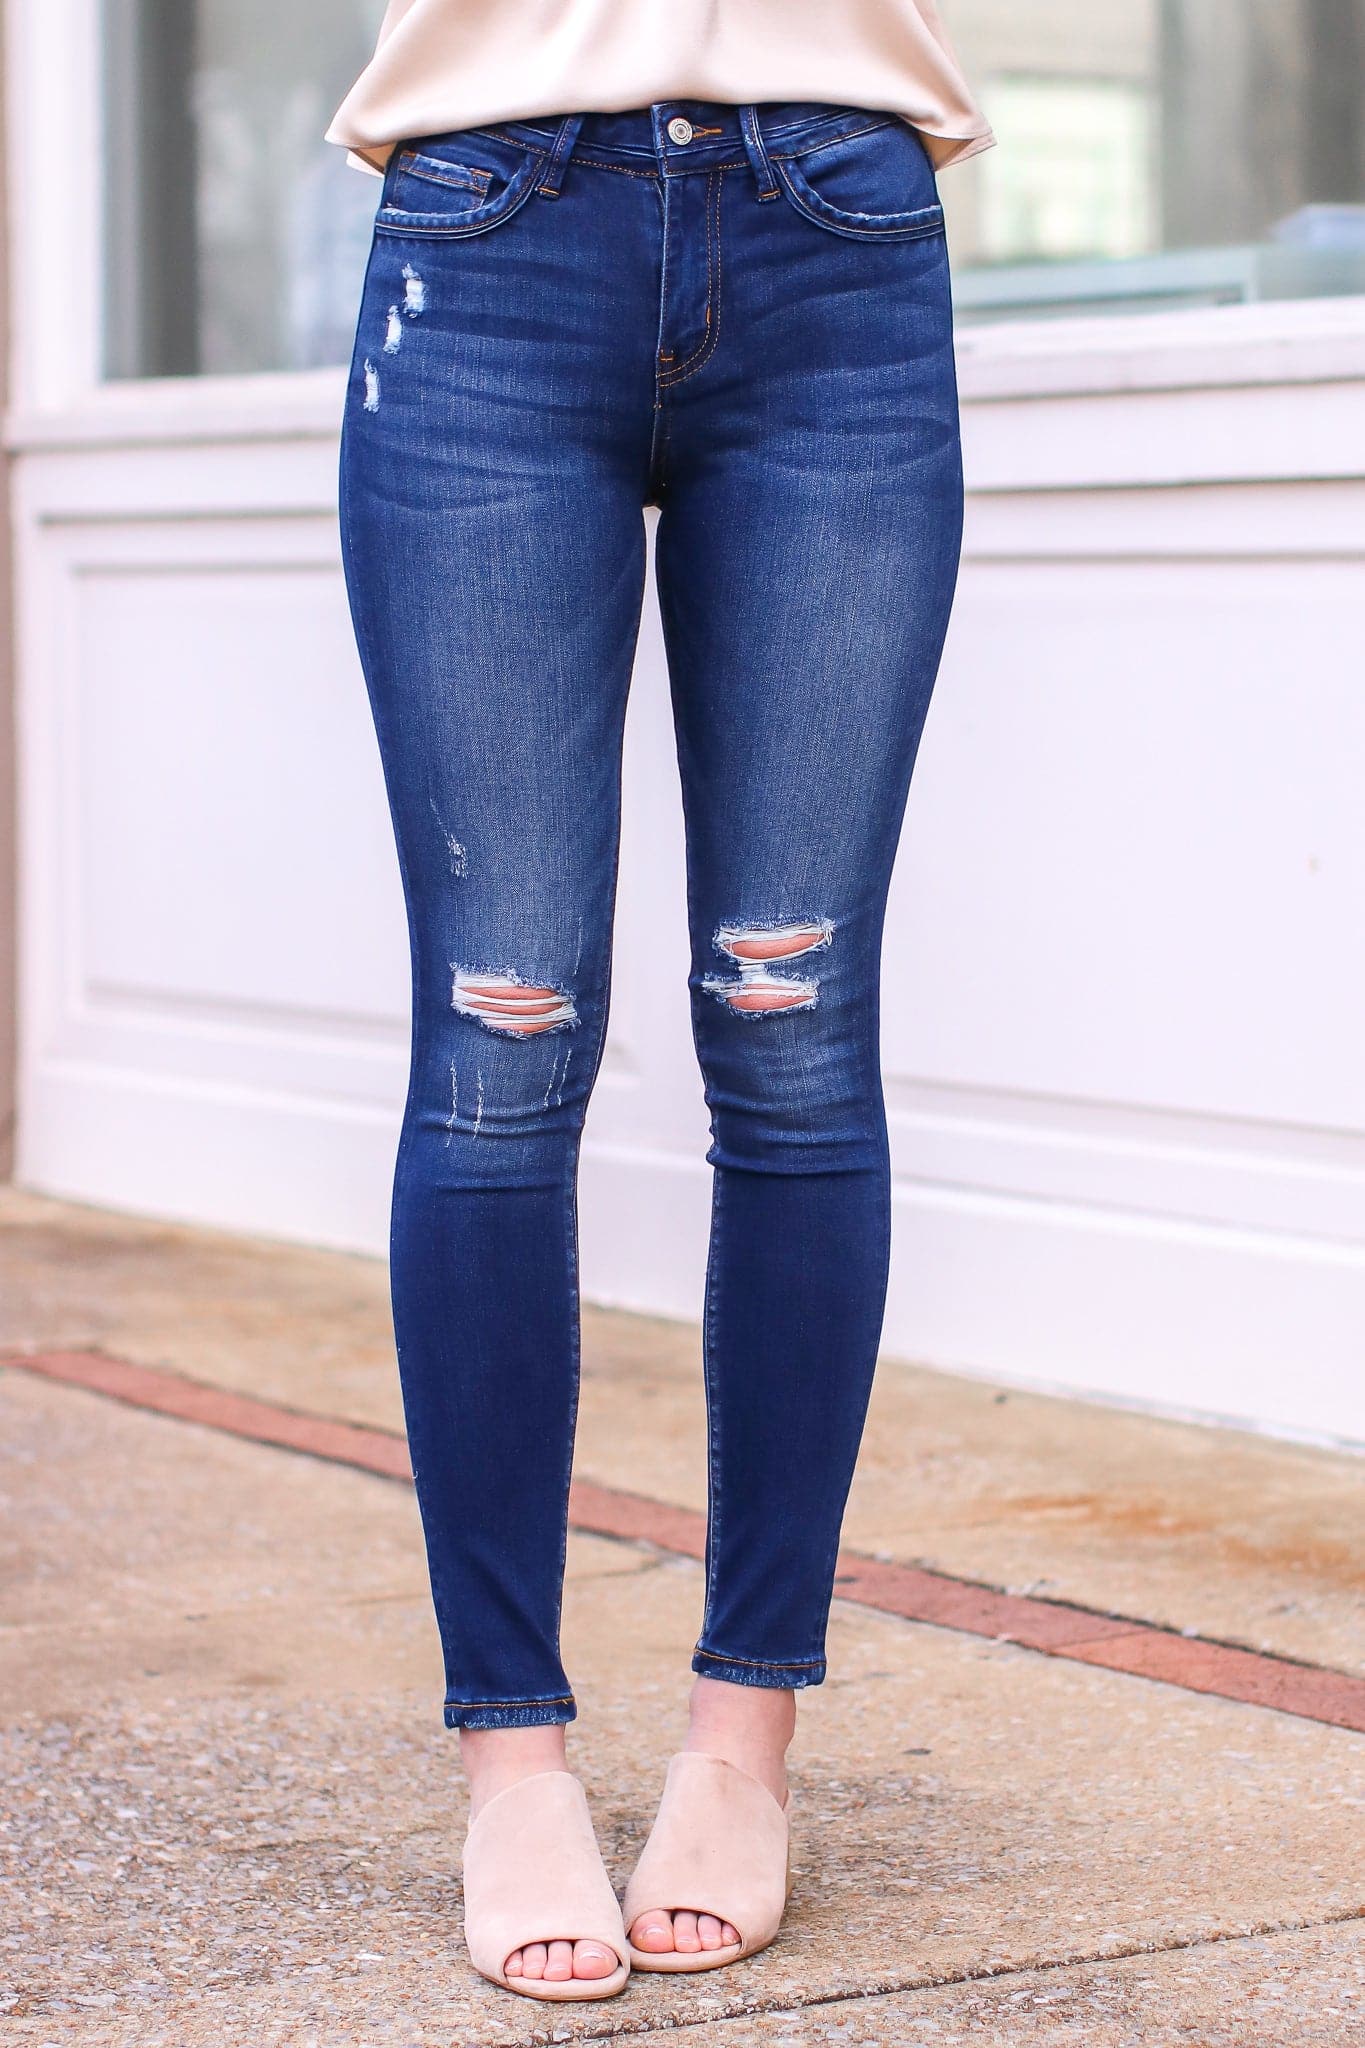  Camari Distressed High Rise Skinny Jeans - FINAL SALE - Madison and Mallory